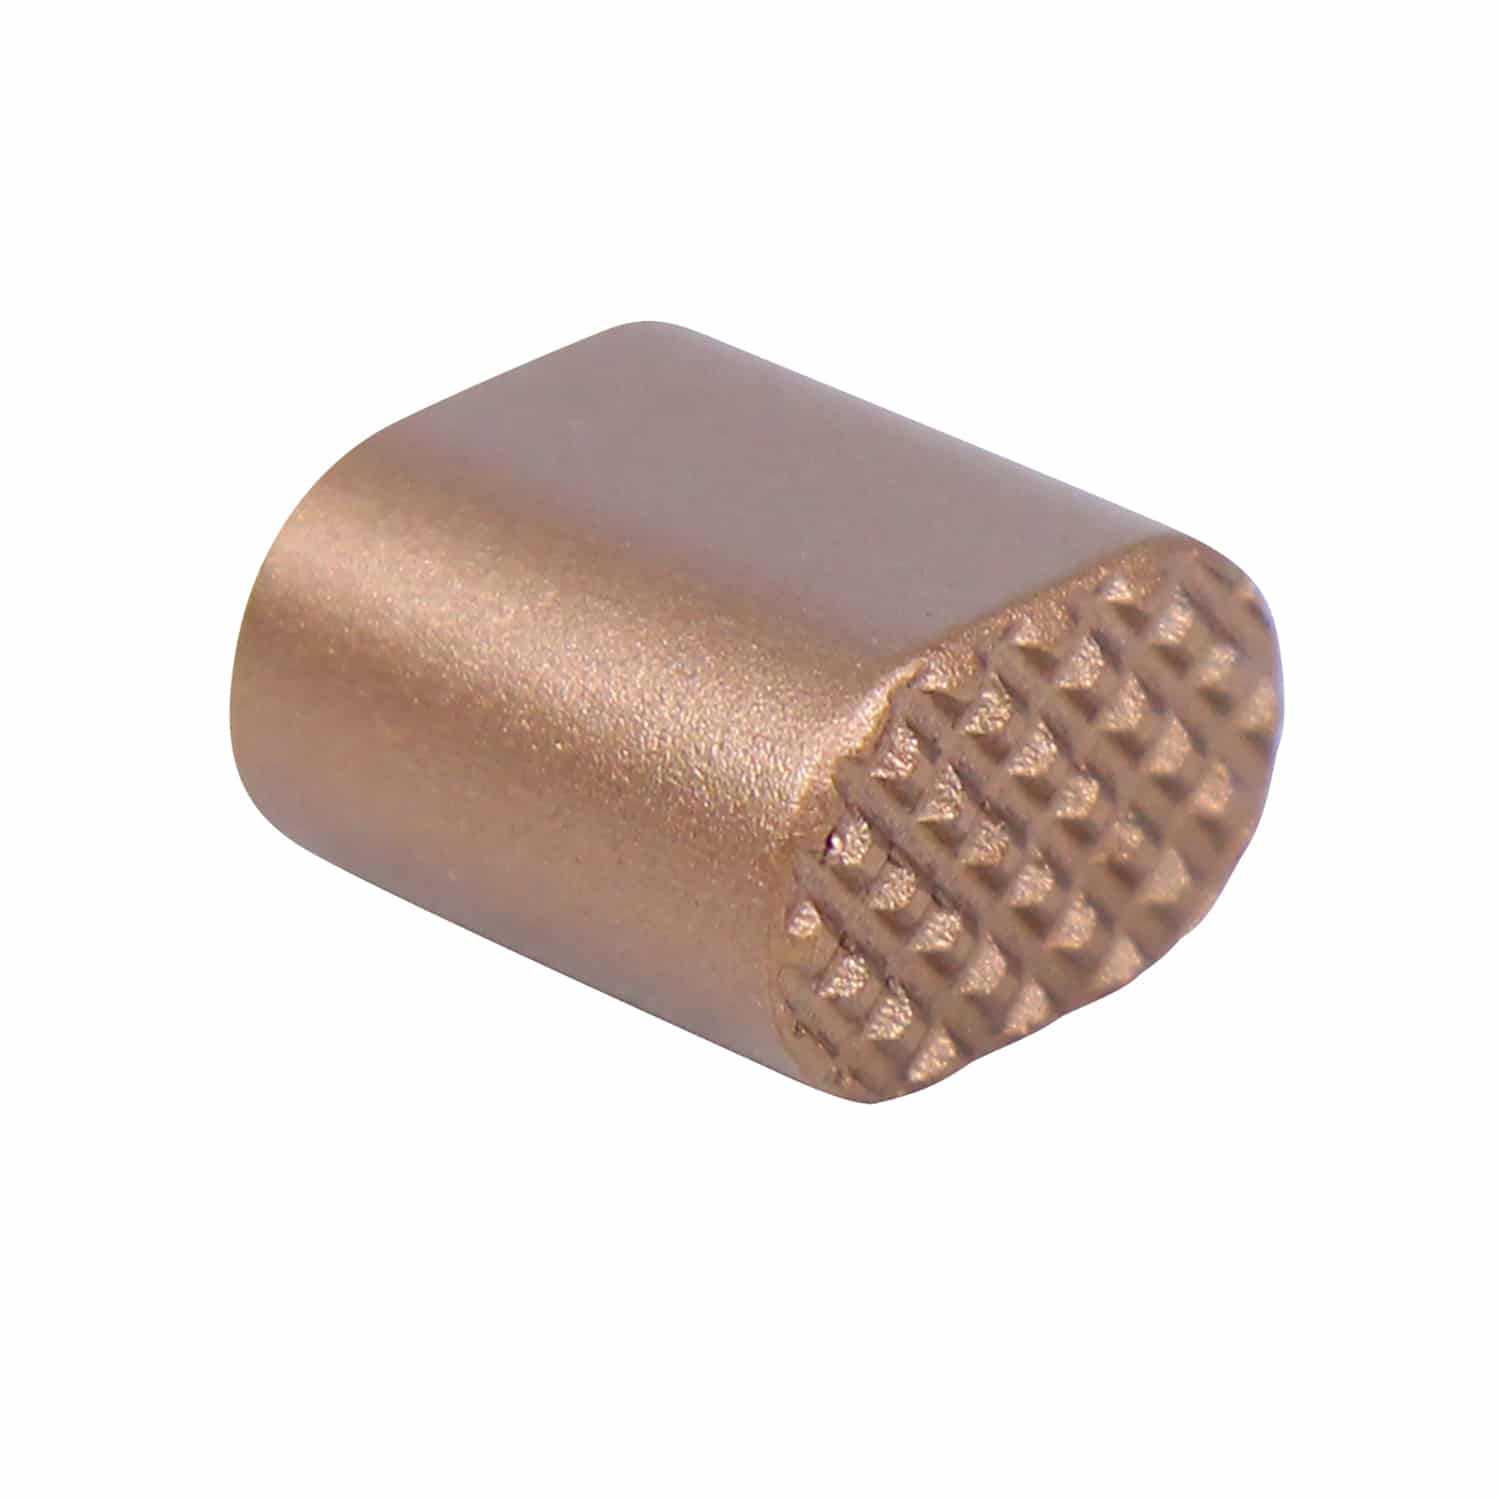 AR-15 Extended Magazine Release Button in Anodized Bronze